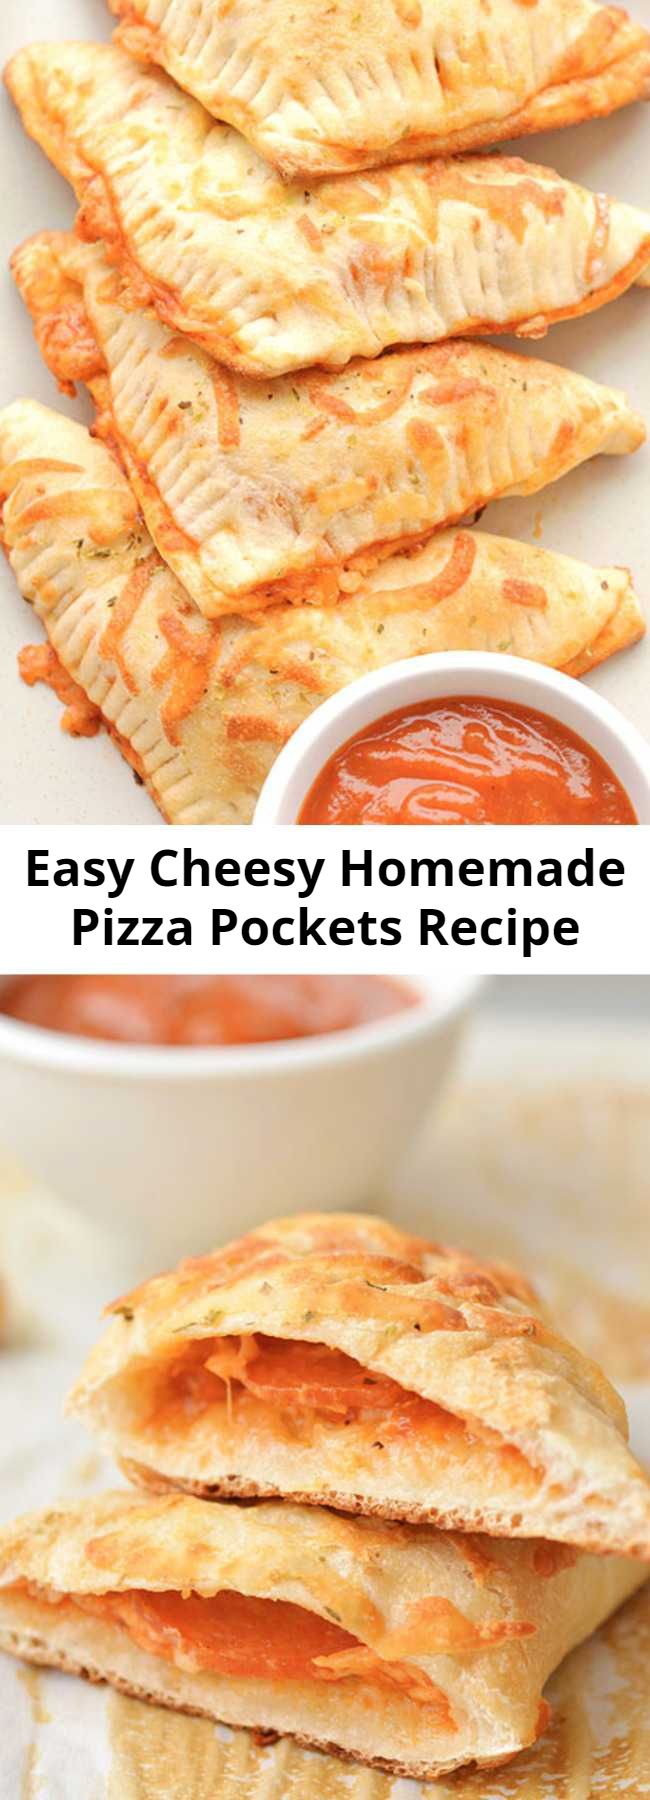 Easy Cheesy Homemade Pizza Pockets Recipe - These easy cheesy homemade pizza pockets are SO EASY and they taste amazing! You can load them with your favourite pizza toppings and in less than 20 minutes you have a fun, delicious and kid friendly meal! They're great for lunch or dinner and best of all, they're kid approved!